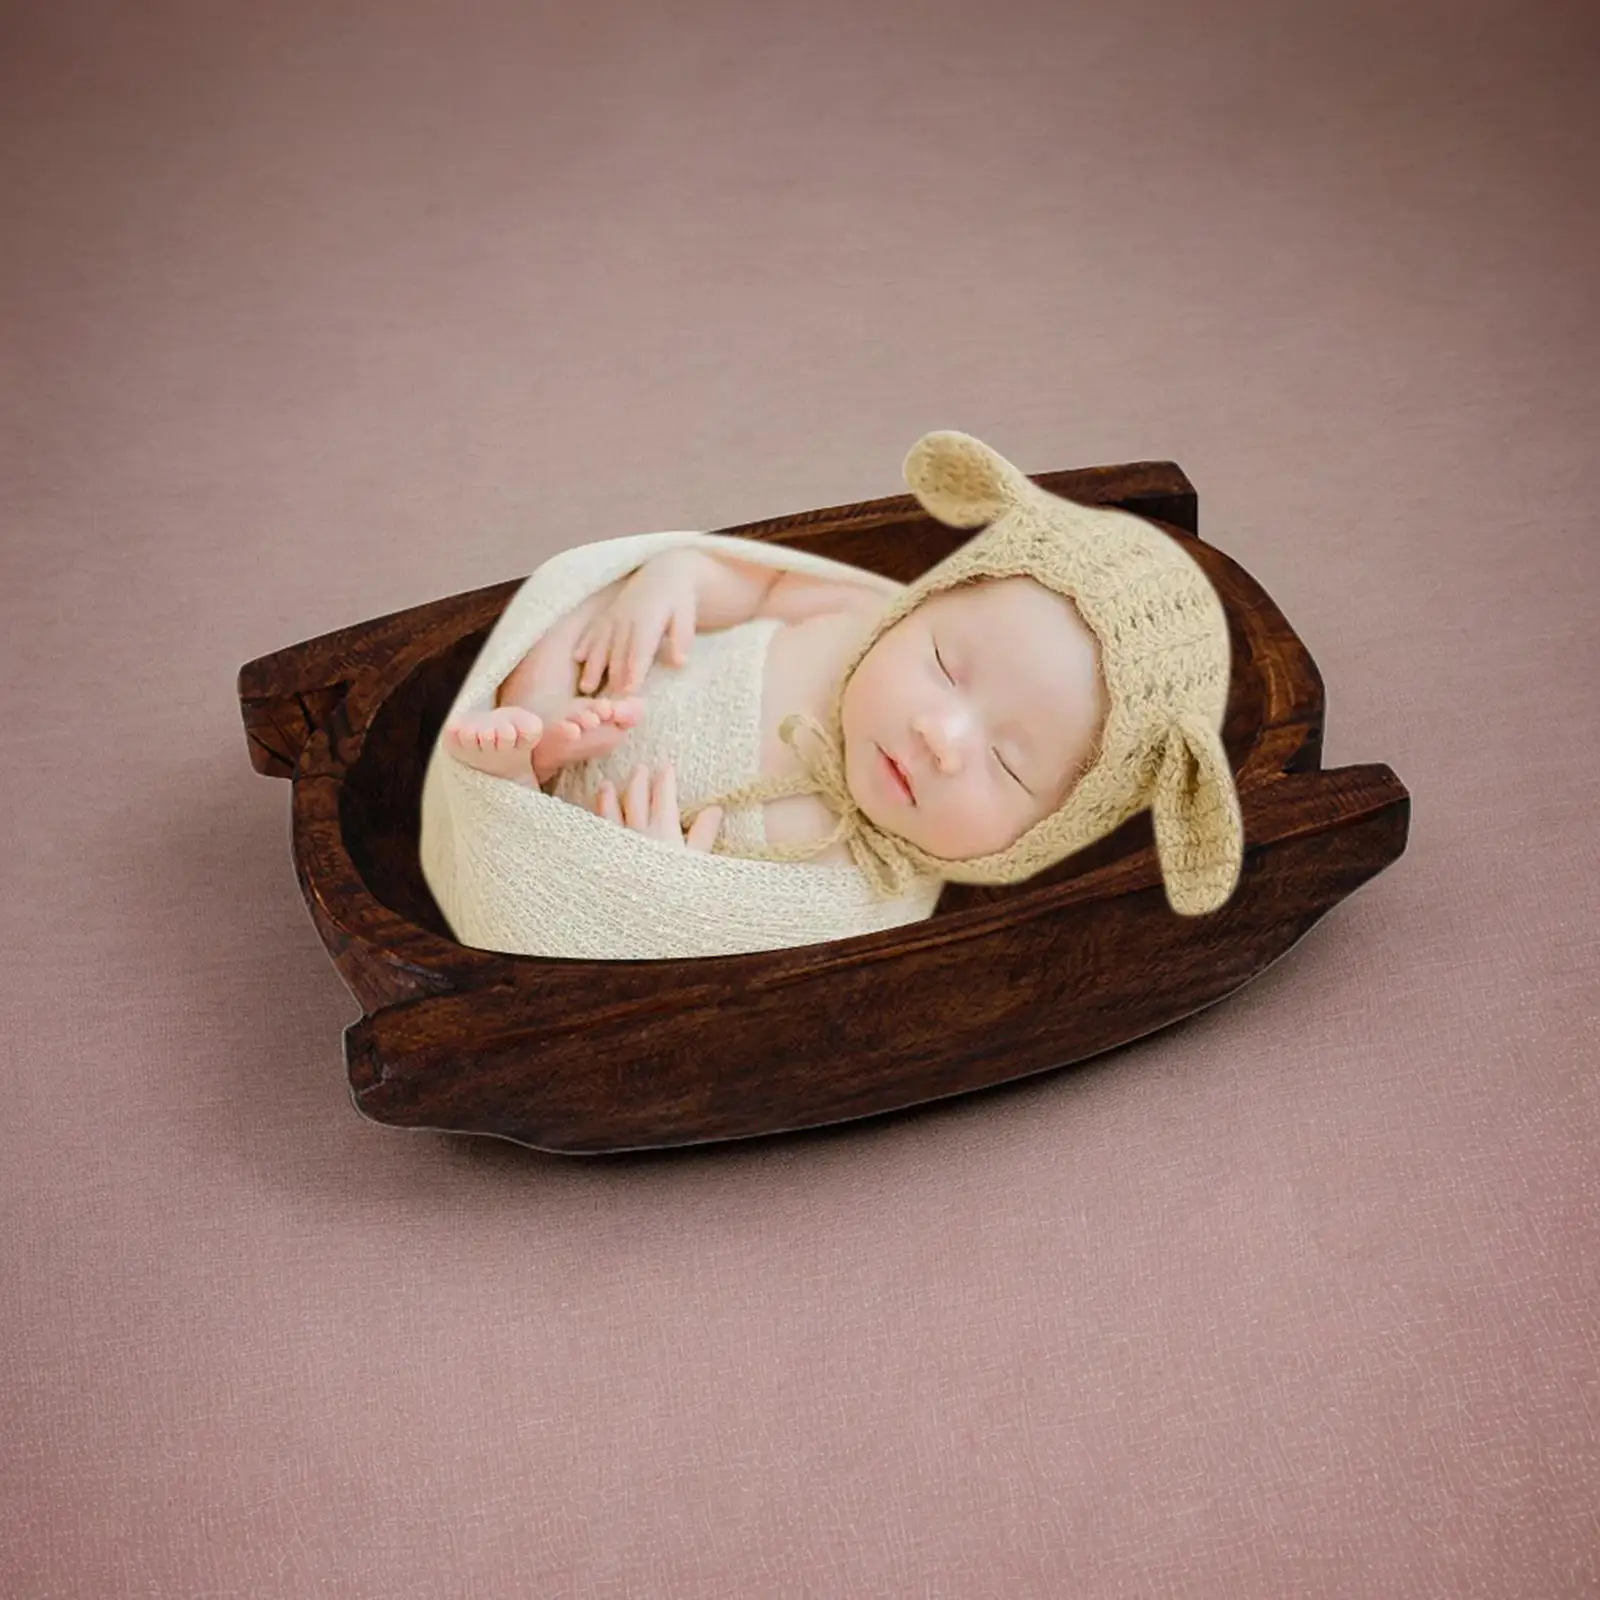 Newborn Photography Props Wooden Bowl Decor Vintage Small Couch Baskets for Baby Girls Boys Monthly Baby Newborn Birthday Decor